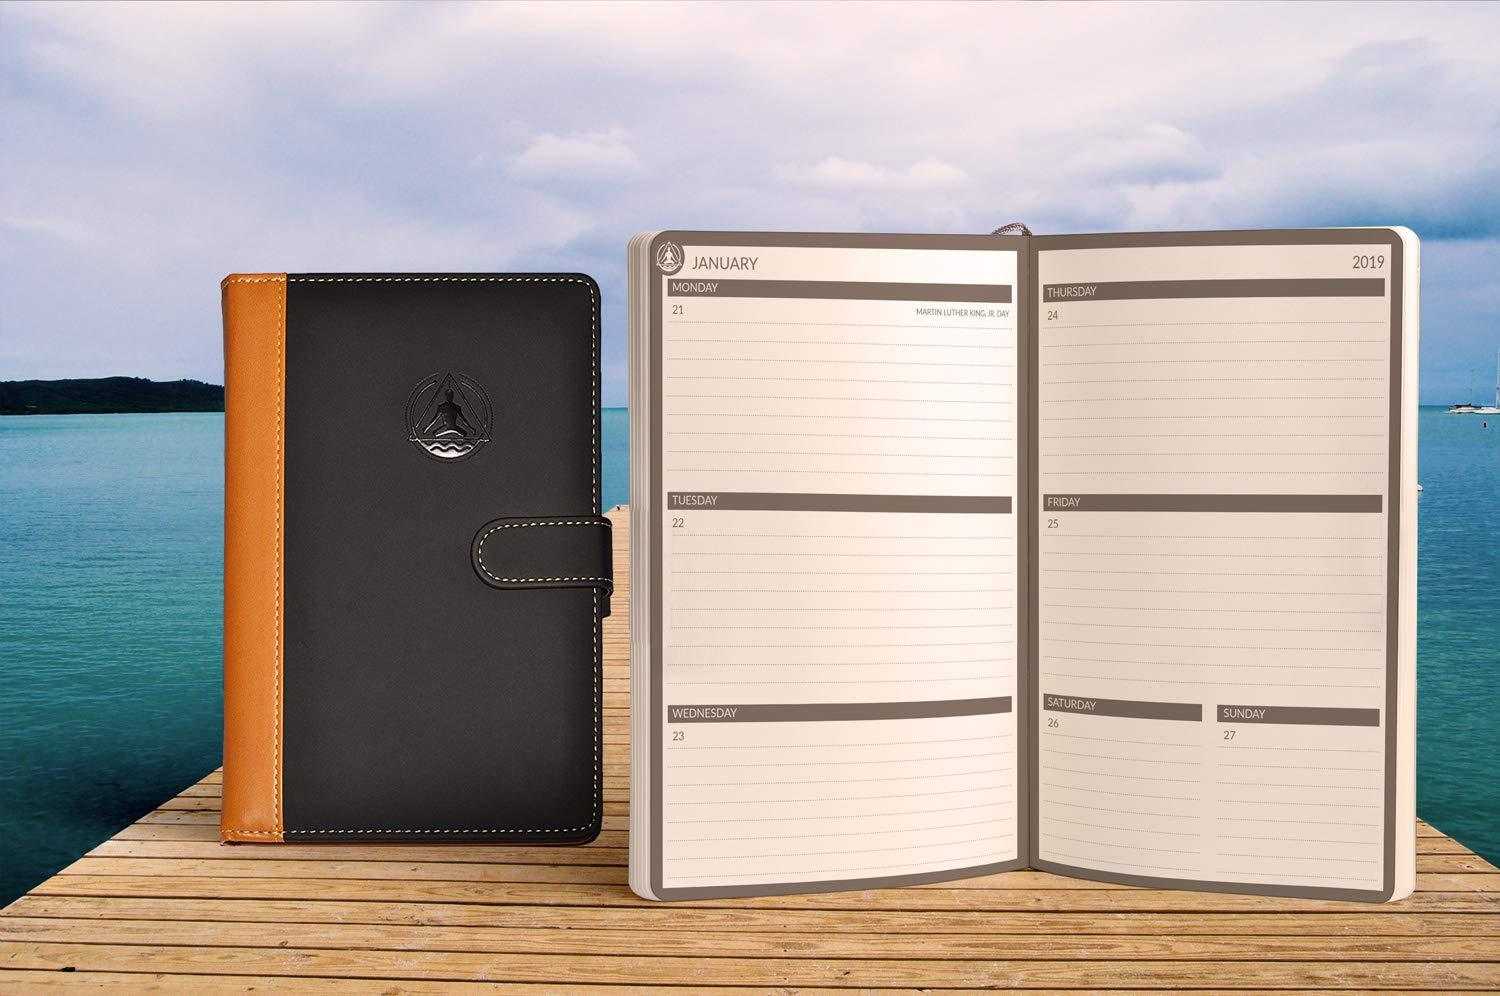 January 2019 - December 2019 Dated Planner Daily, Weekly, Monthly and Yearly | Best Academic Calendar Notebook Journal | Deluxe Faux Leather Personal Organizer | A5 Sized (8.5" L x 6.1" W x 1.3" H) | Transcending Waves Planner